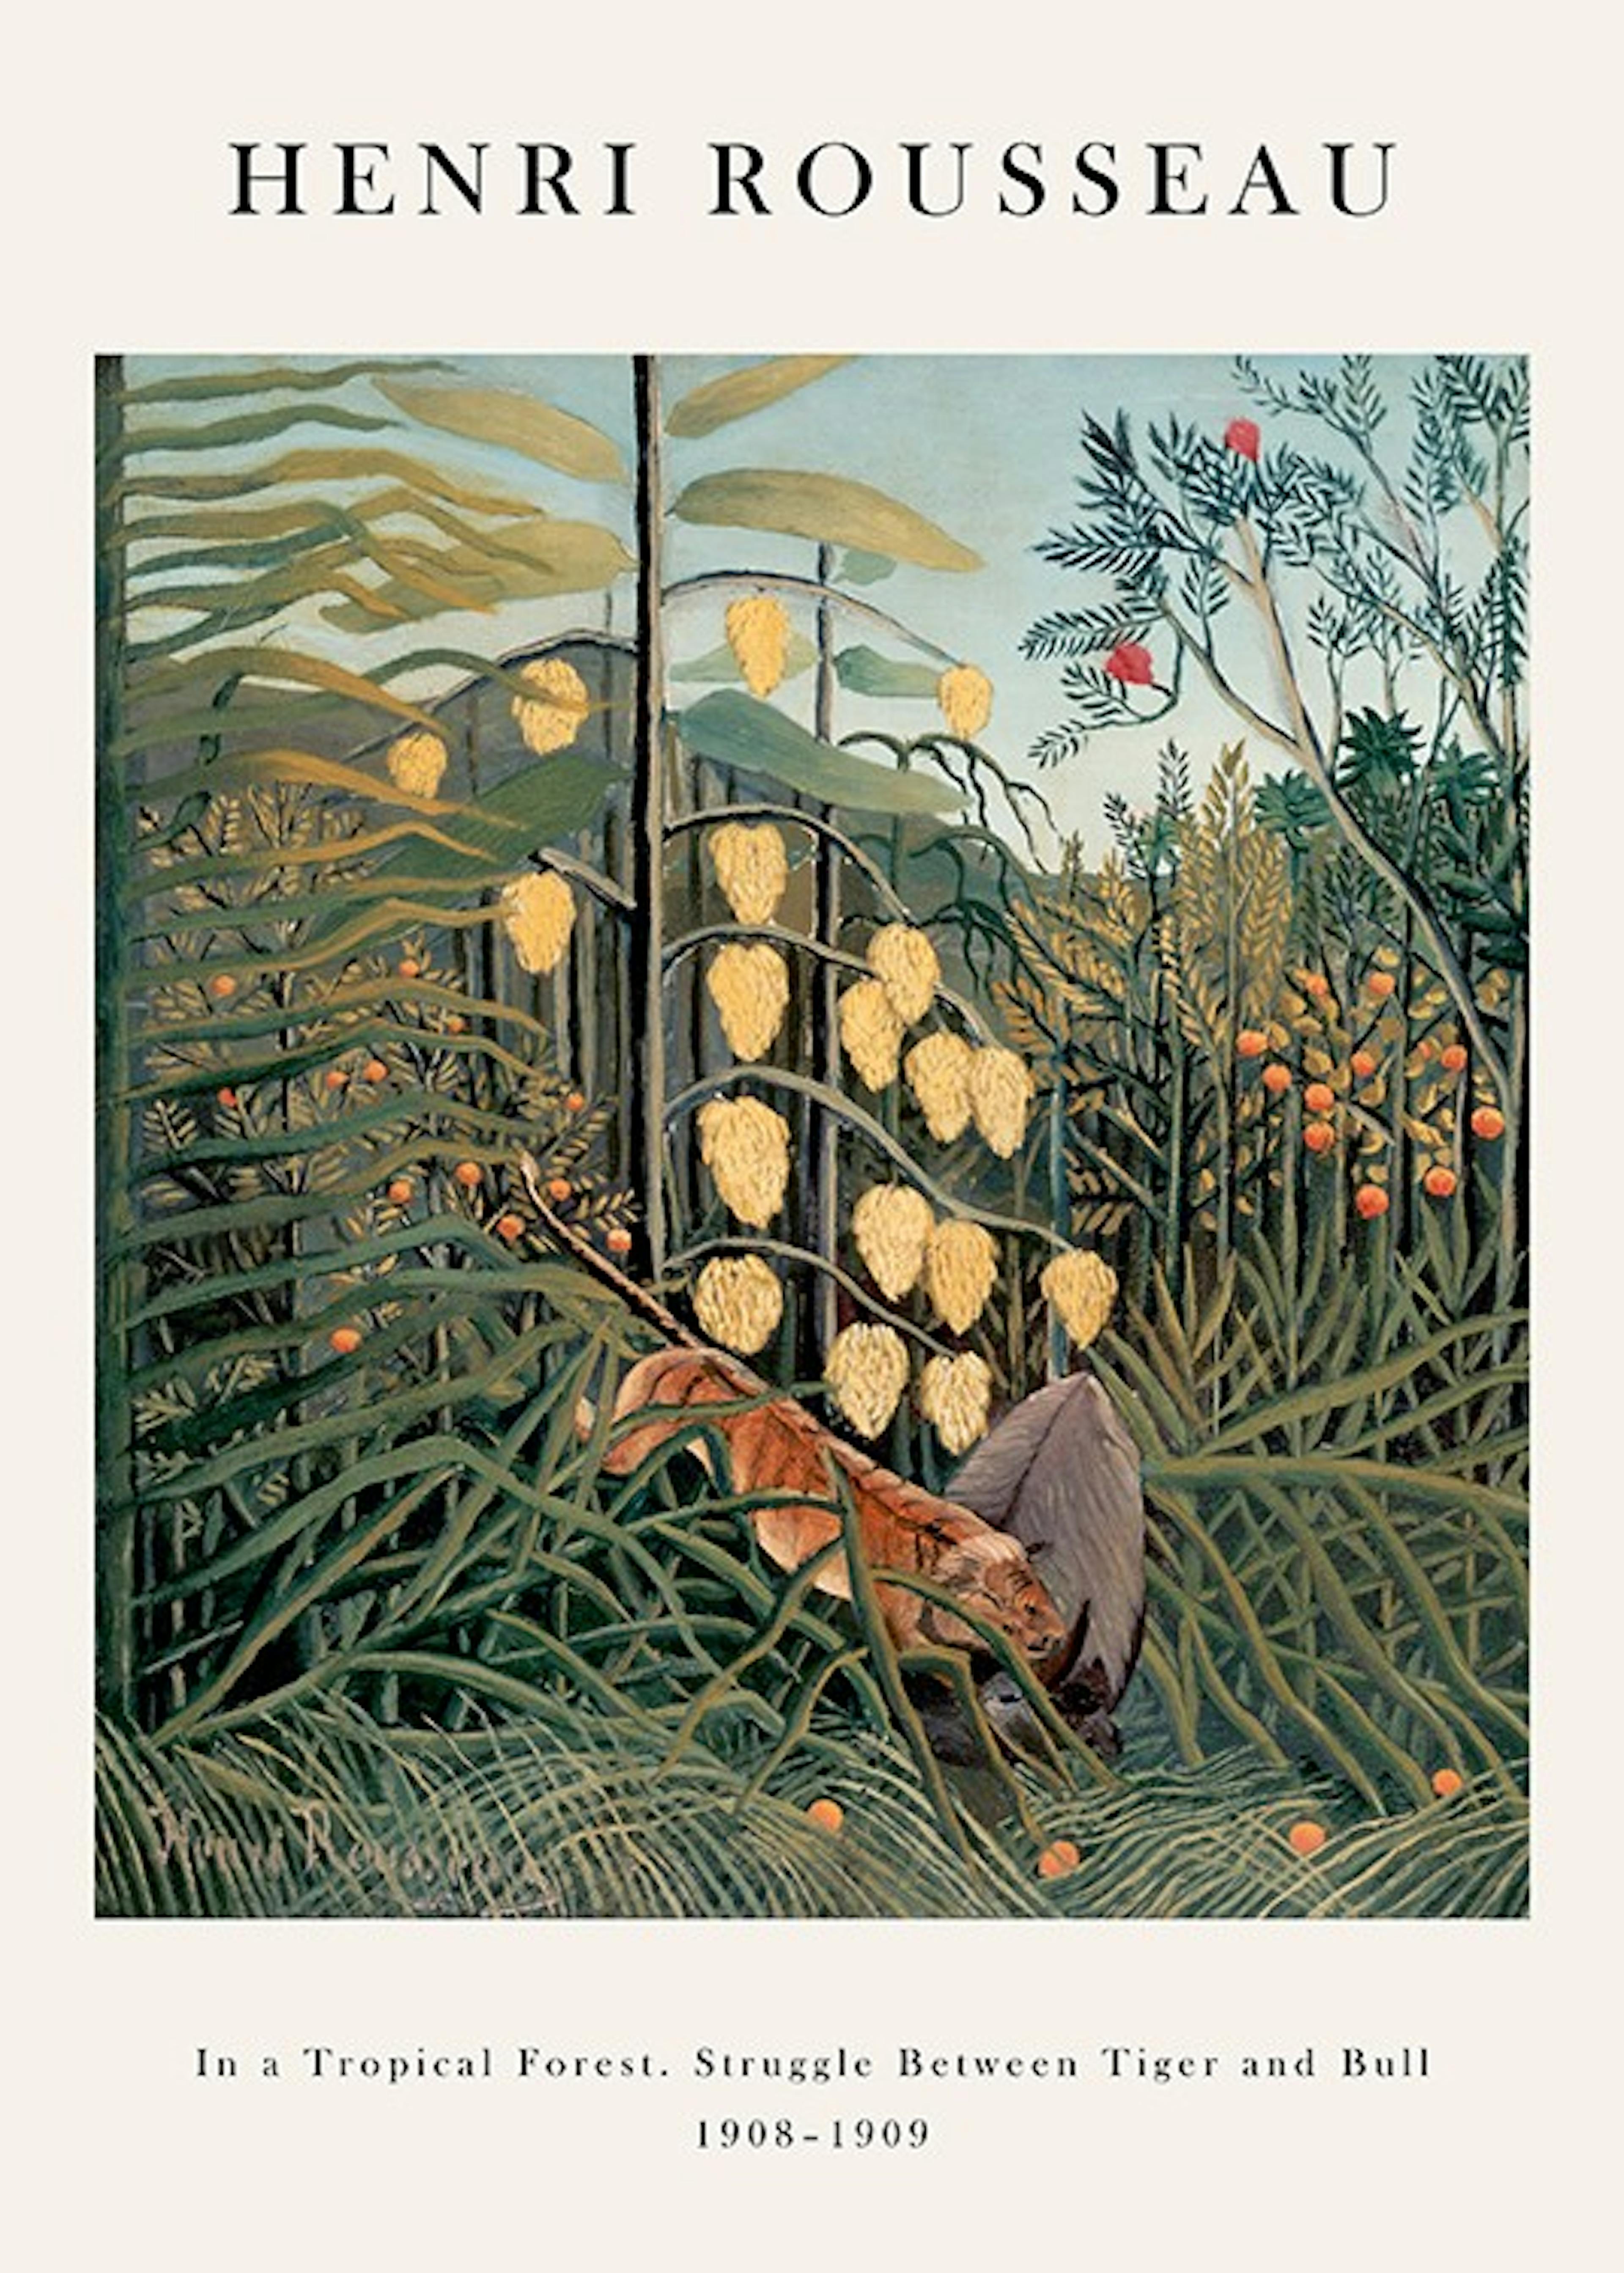 Rousseau - In a Tropical Forest. Struggle Between Tiger and Bull Plakat 0